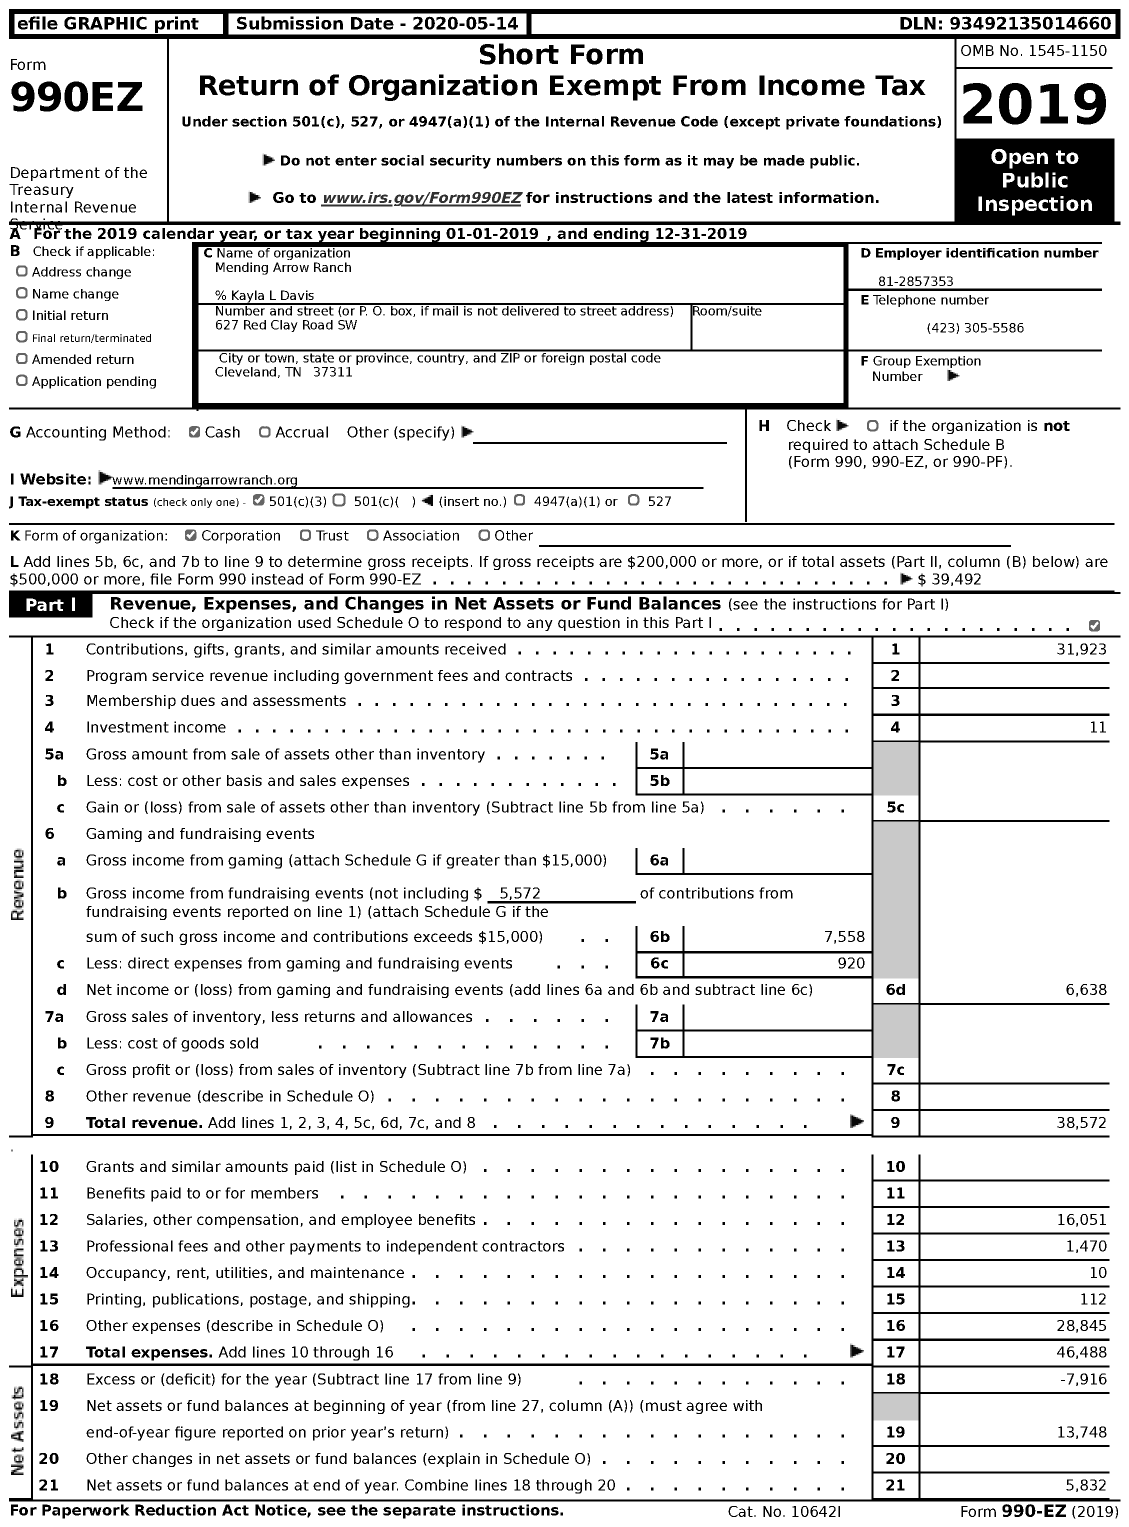 Image of first page of 2019 Form 990EZ for Mending Arrow Ranch